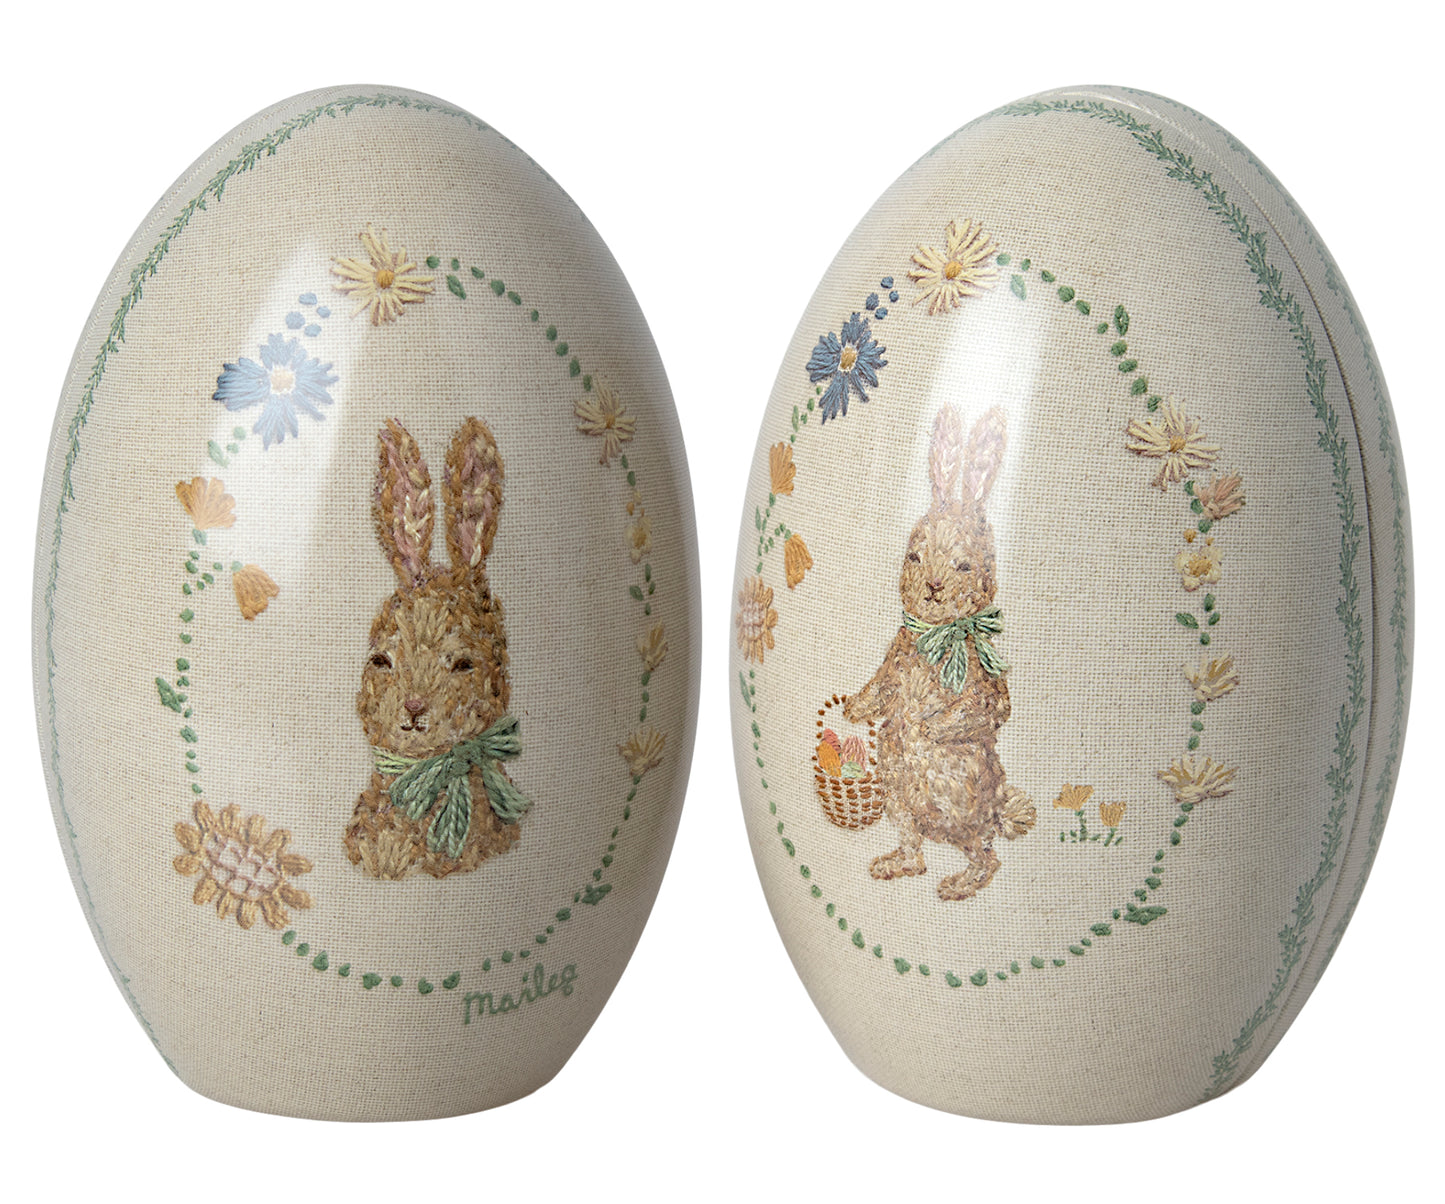 Maileg Metal Easter Egg, Green - Options Available (Set Of Two, Large Only Or Small Only)